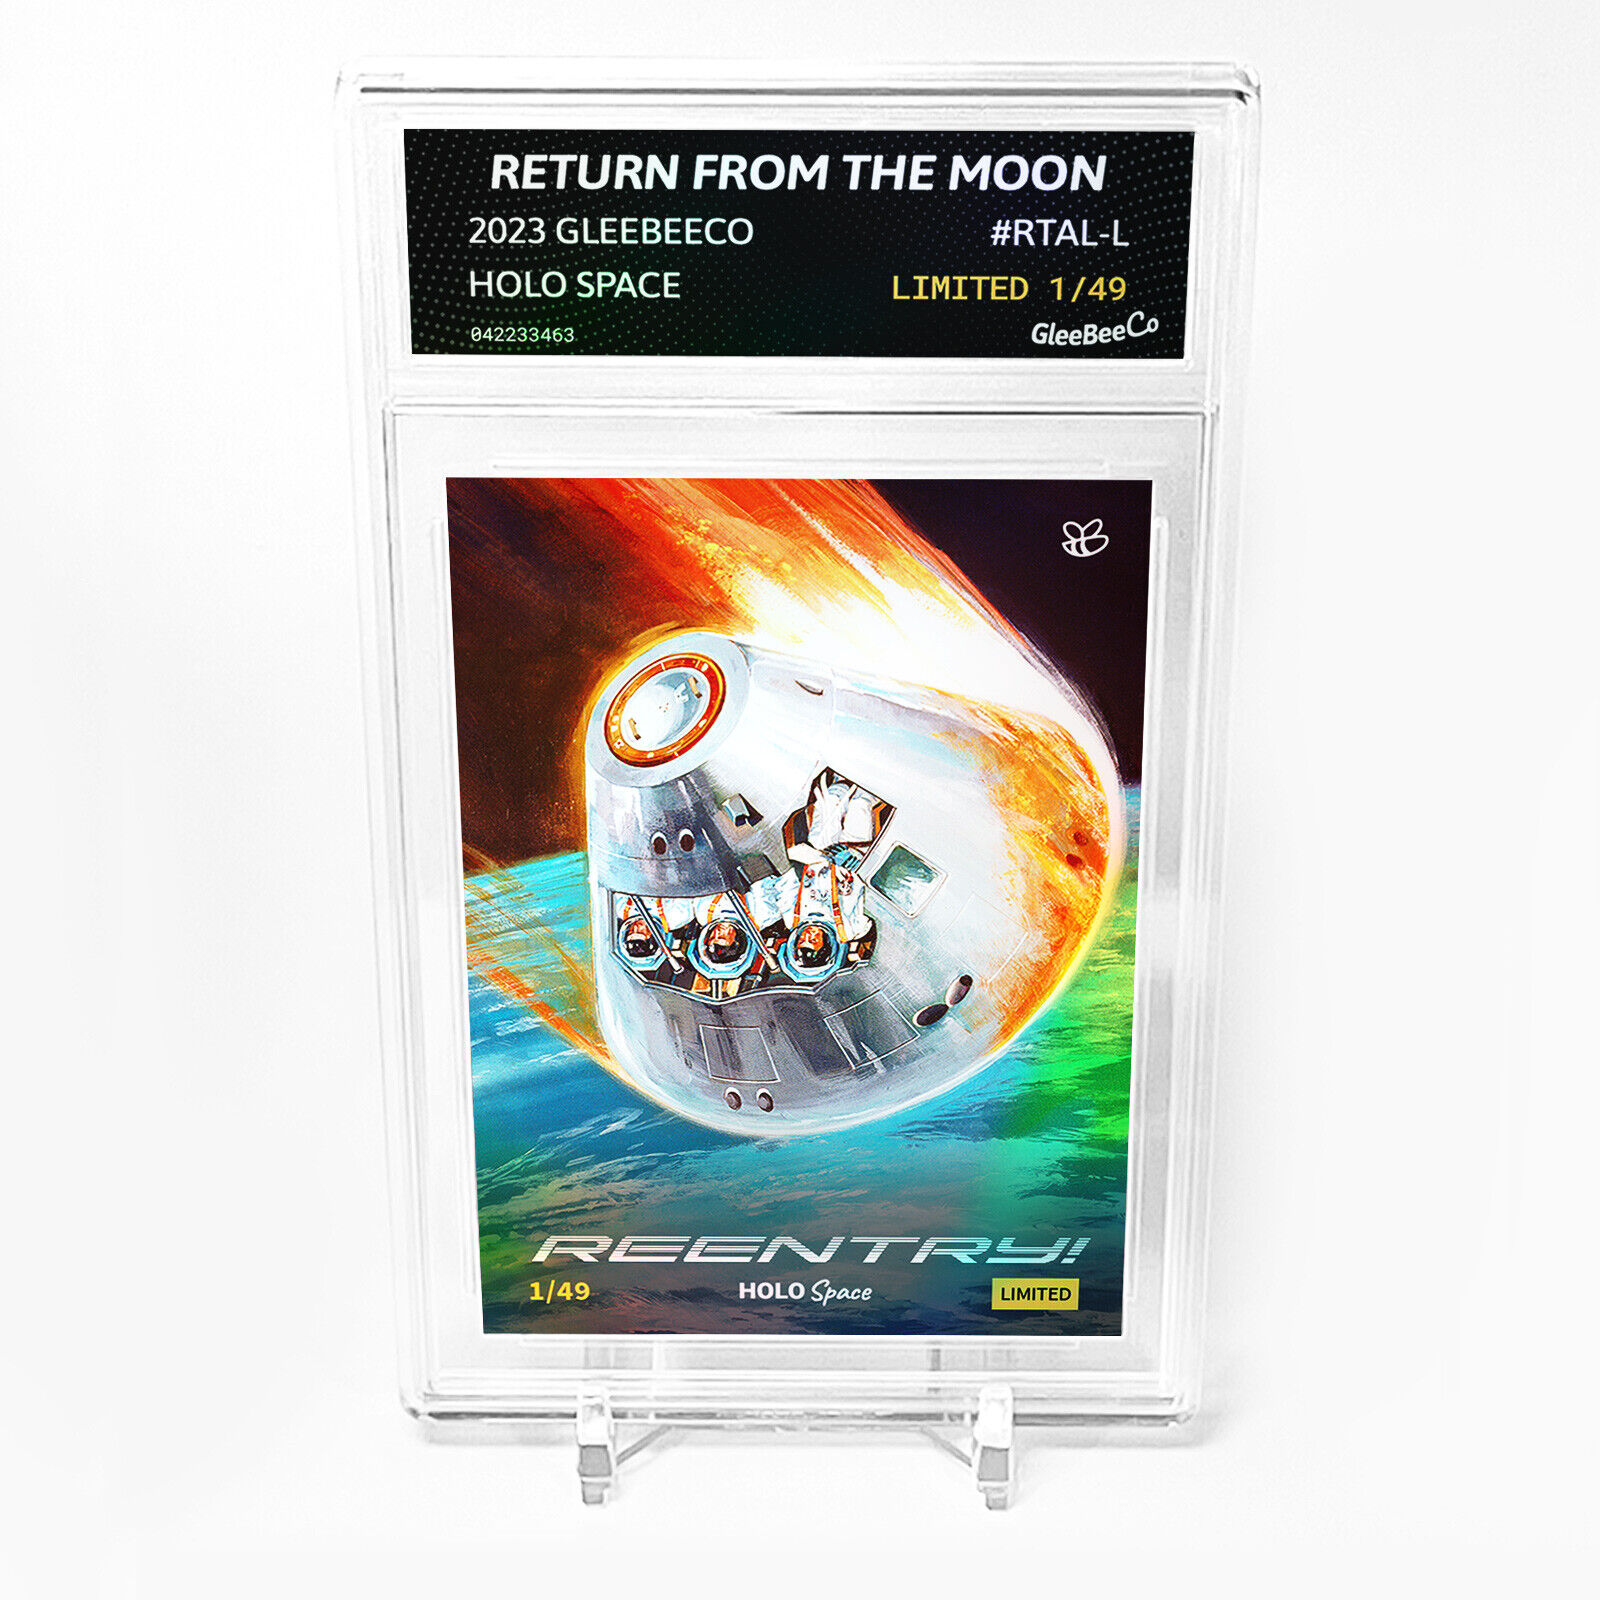 RETURN FROM THE MOON Art Card 2023 GleeBeeCo Holo Space Slabbed #RTAL-L /49